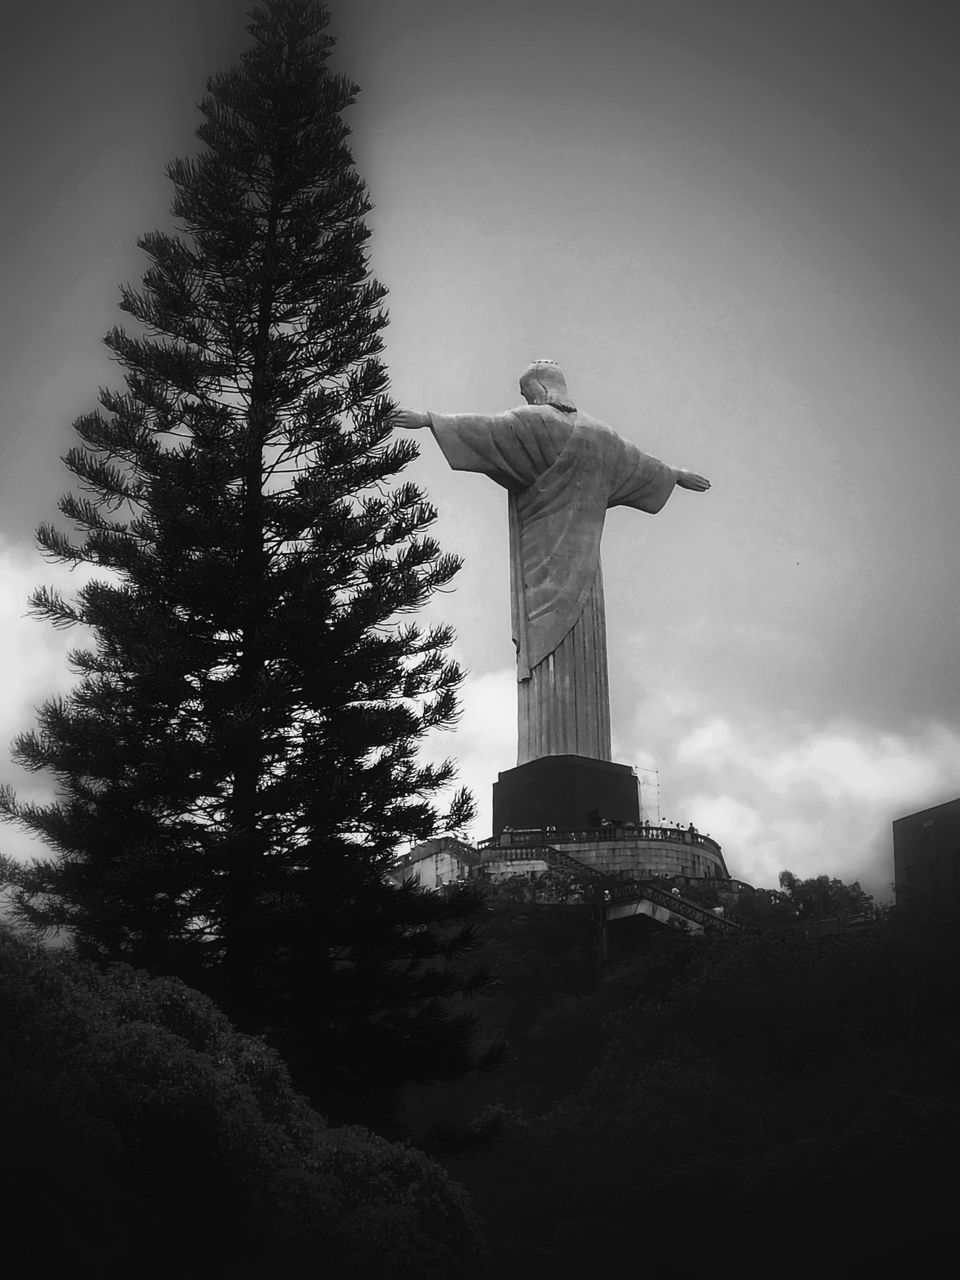 black and white, darkness, tree, sculpture, statue, monochrome, monochrome photography, plant, black, sky, white, human representation, christmas tree, nature, architecture, representation, low angle view, no people, religion, travel destinations, light, male likeness, spirituality, history, creativity, the past, belief, travel, cloud, outdoors, built structure, memorial, day, craft